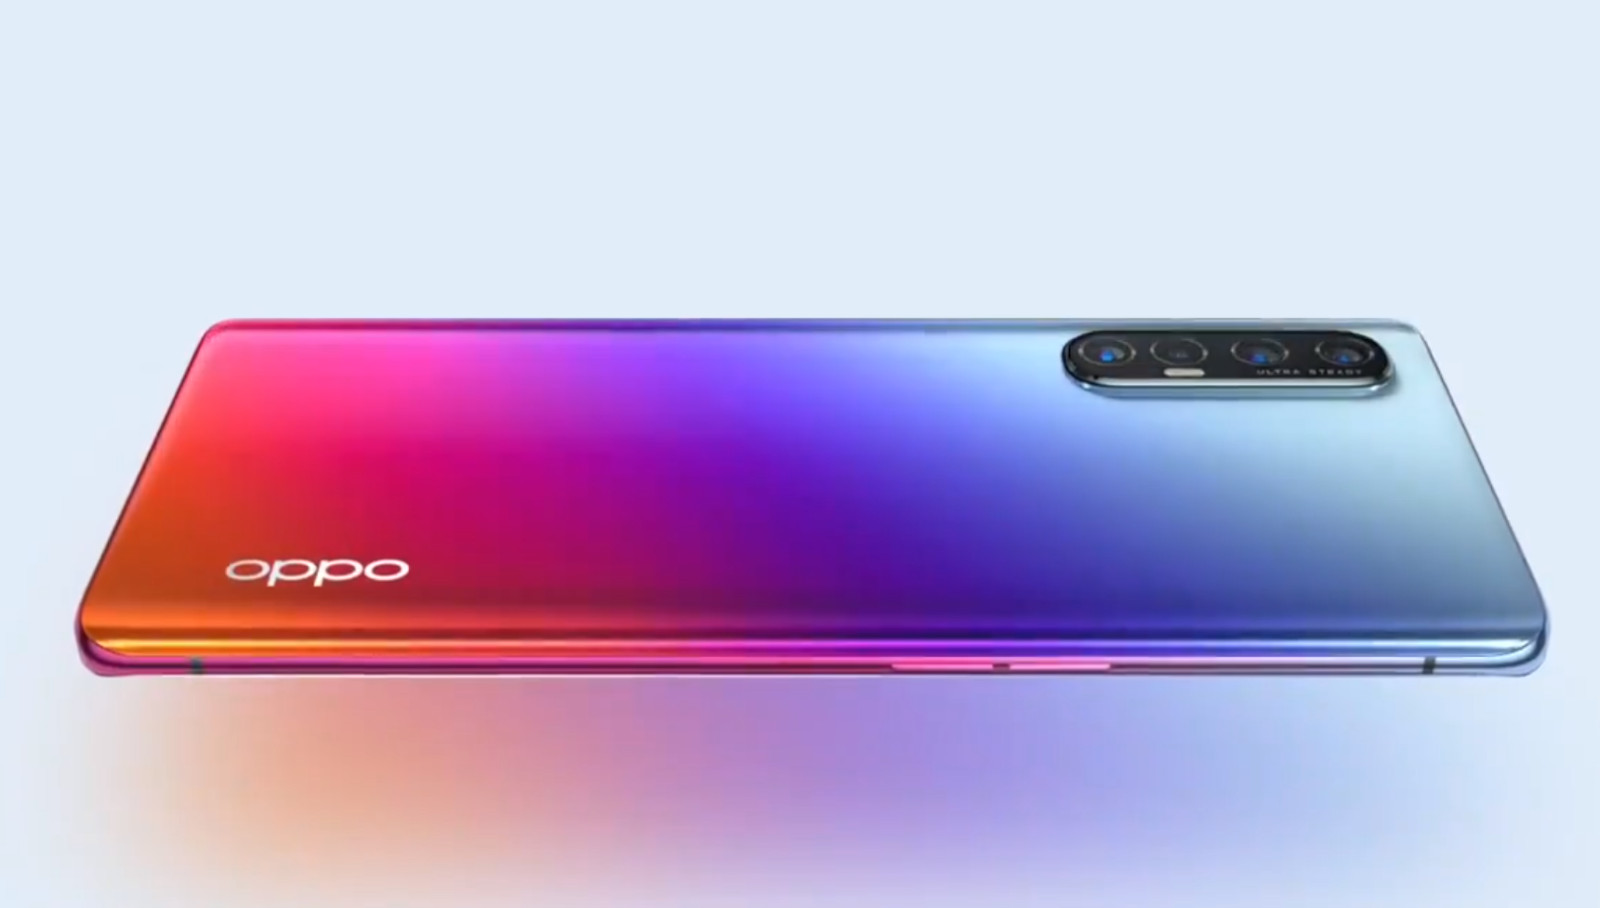 Oppo Reno 3 5G and Oppo Reno 3 Pro 5G: What you need to know